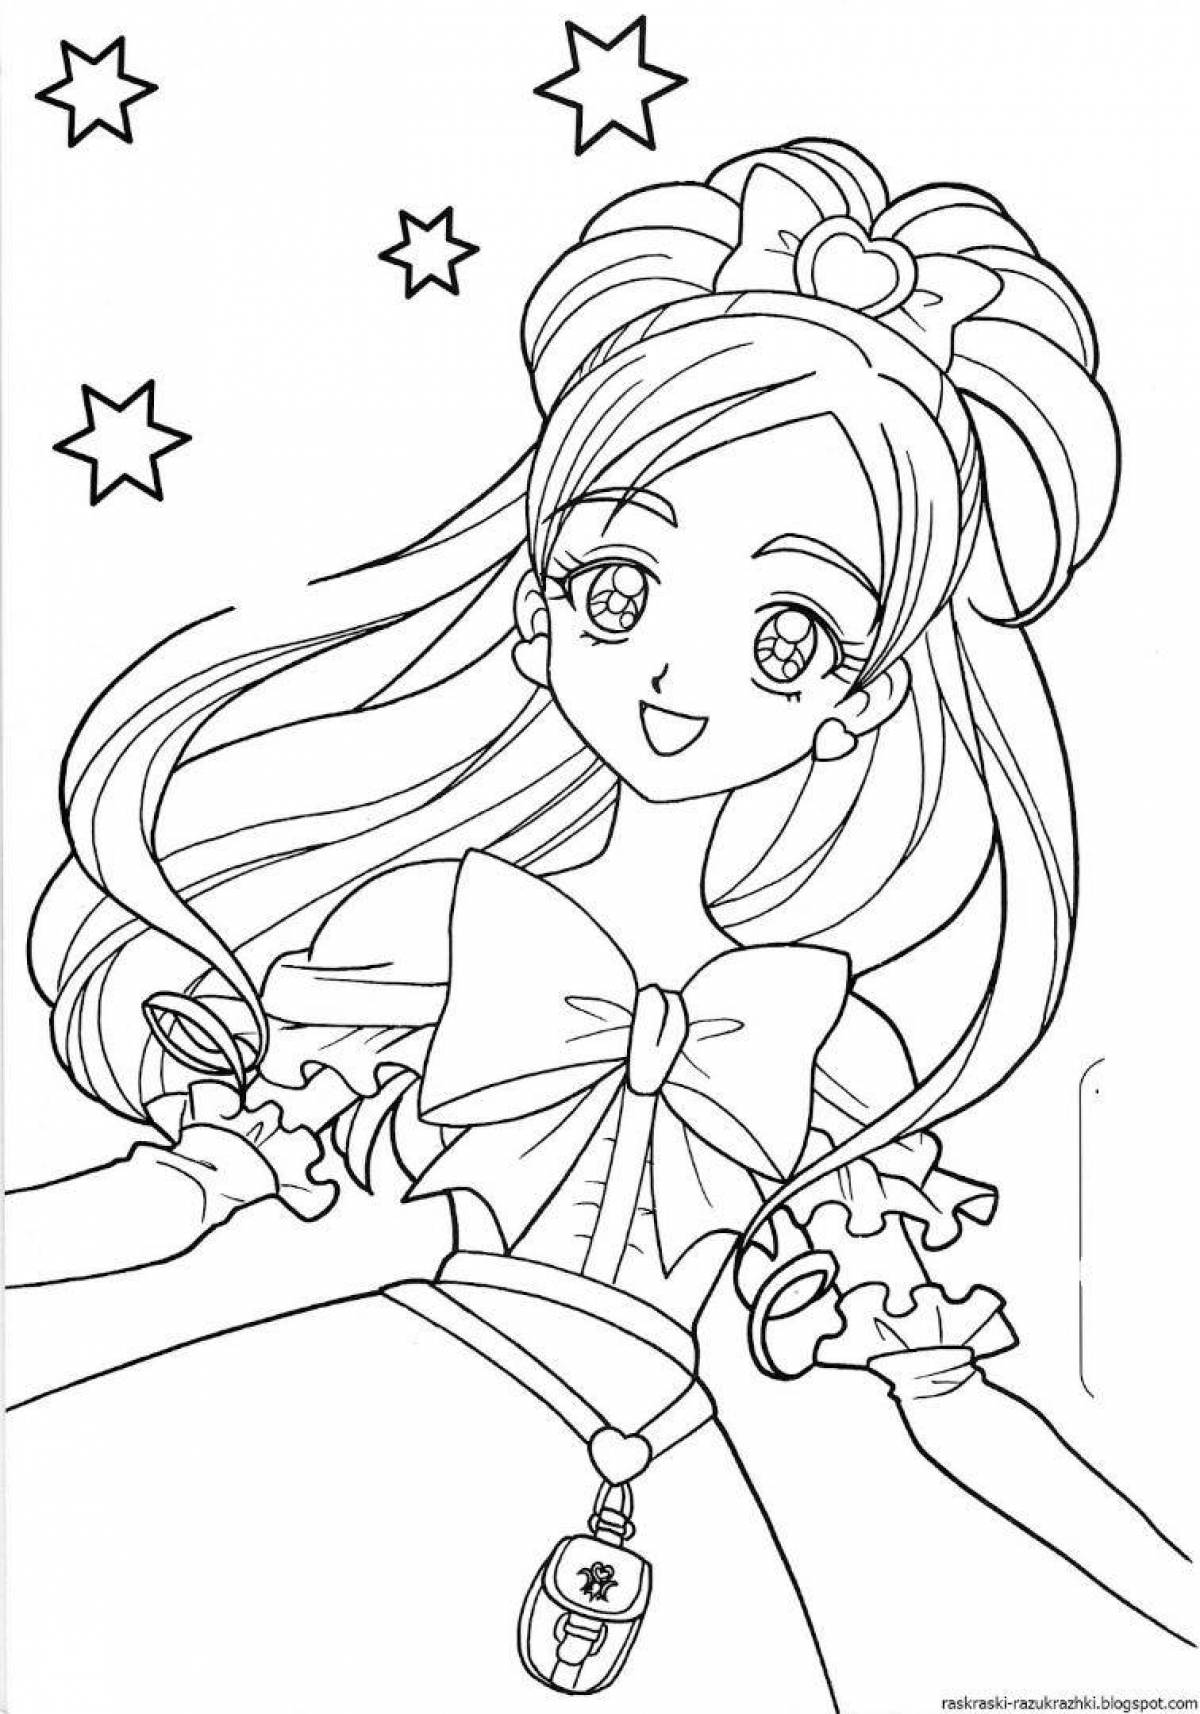 Animated anime coloring book for girls 7 years old